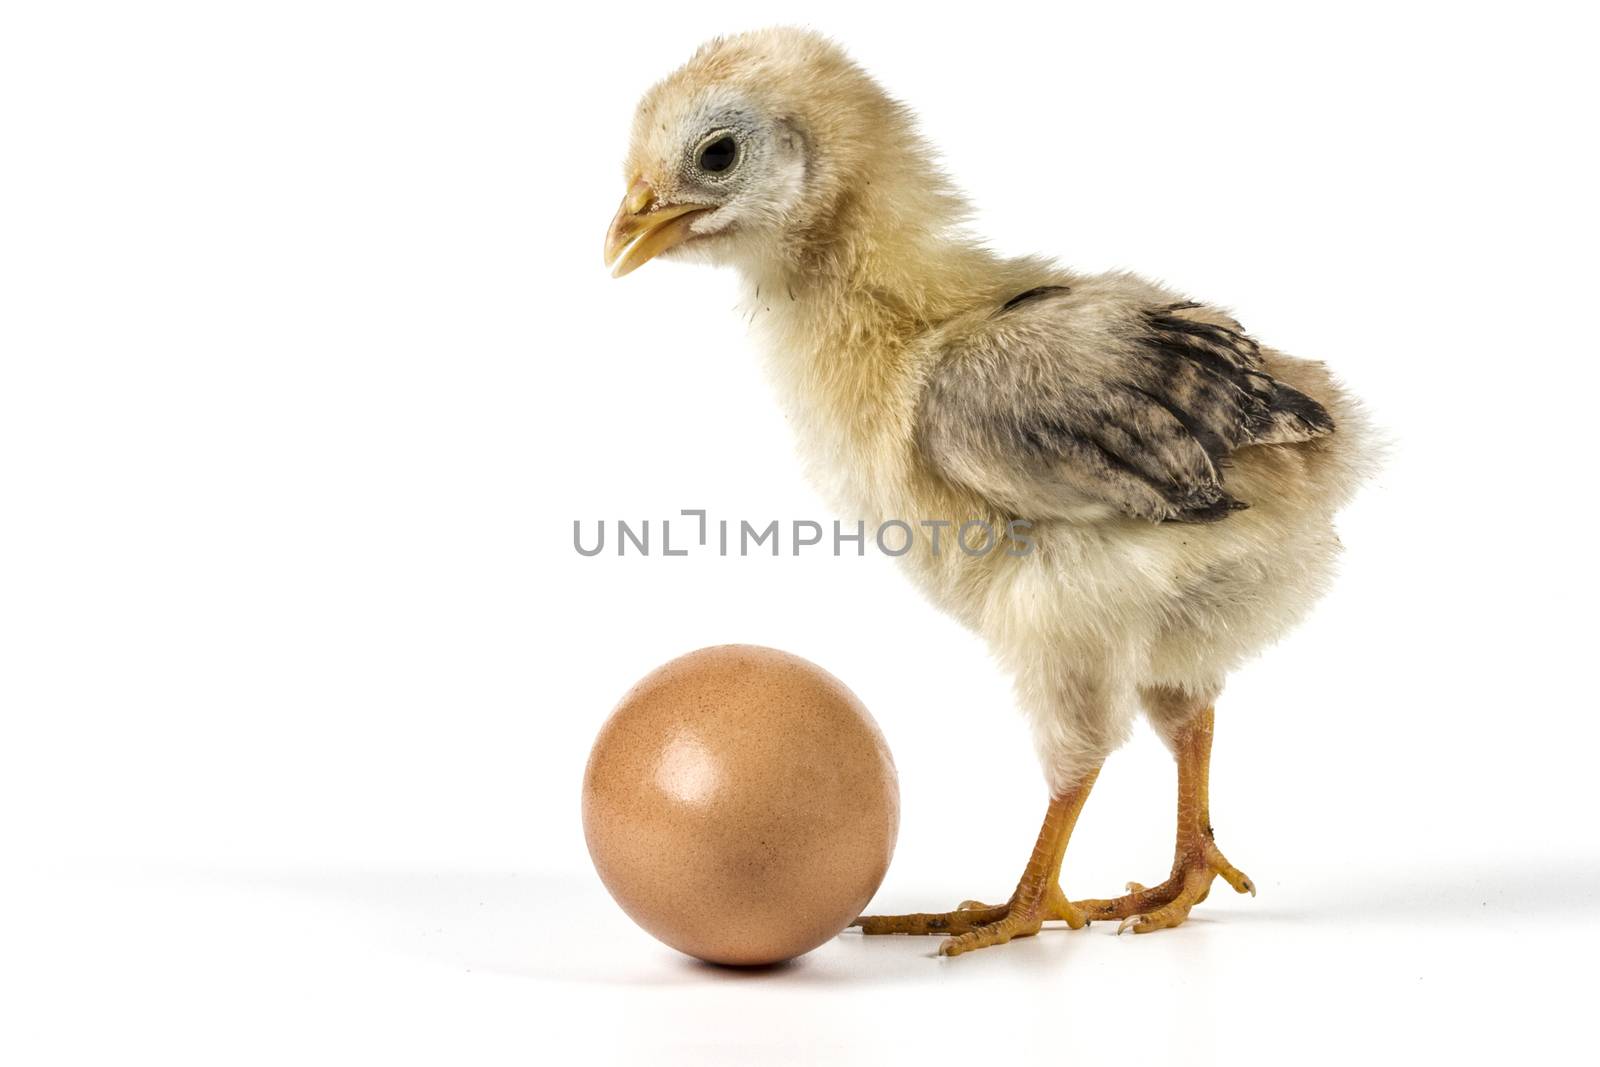 Little chicken and egg isolated on white background with shadow